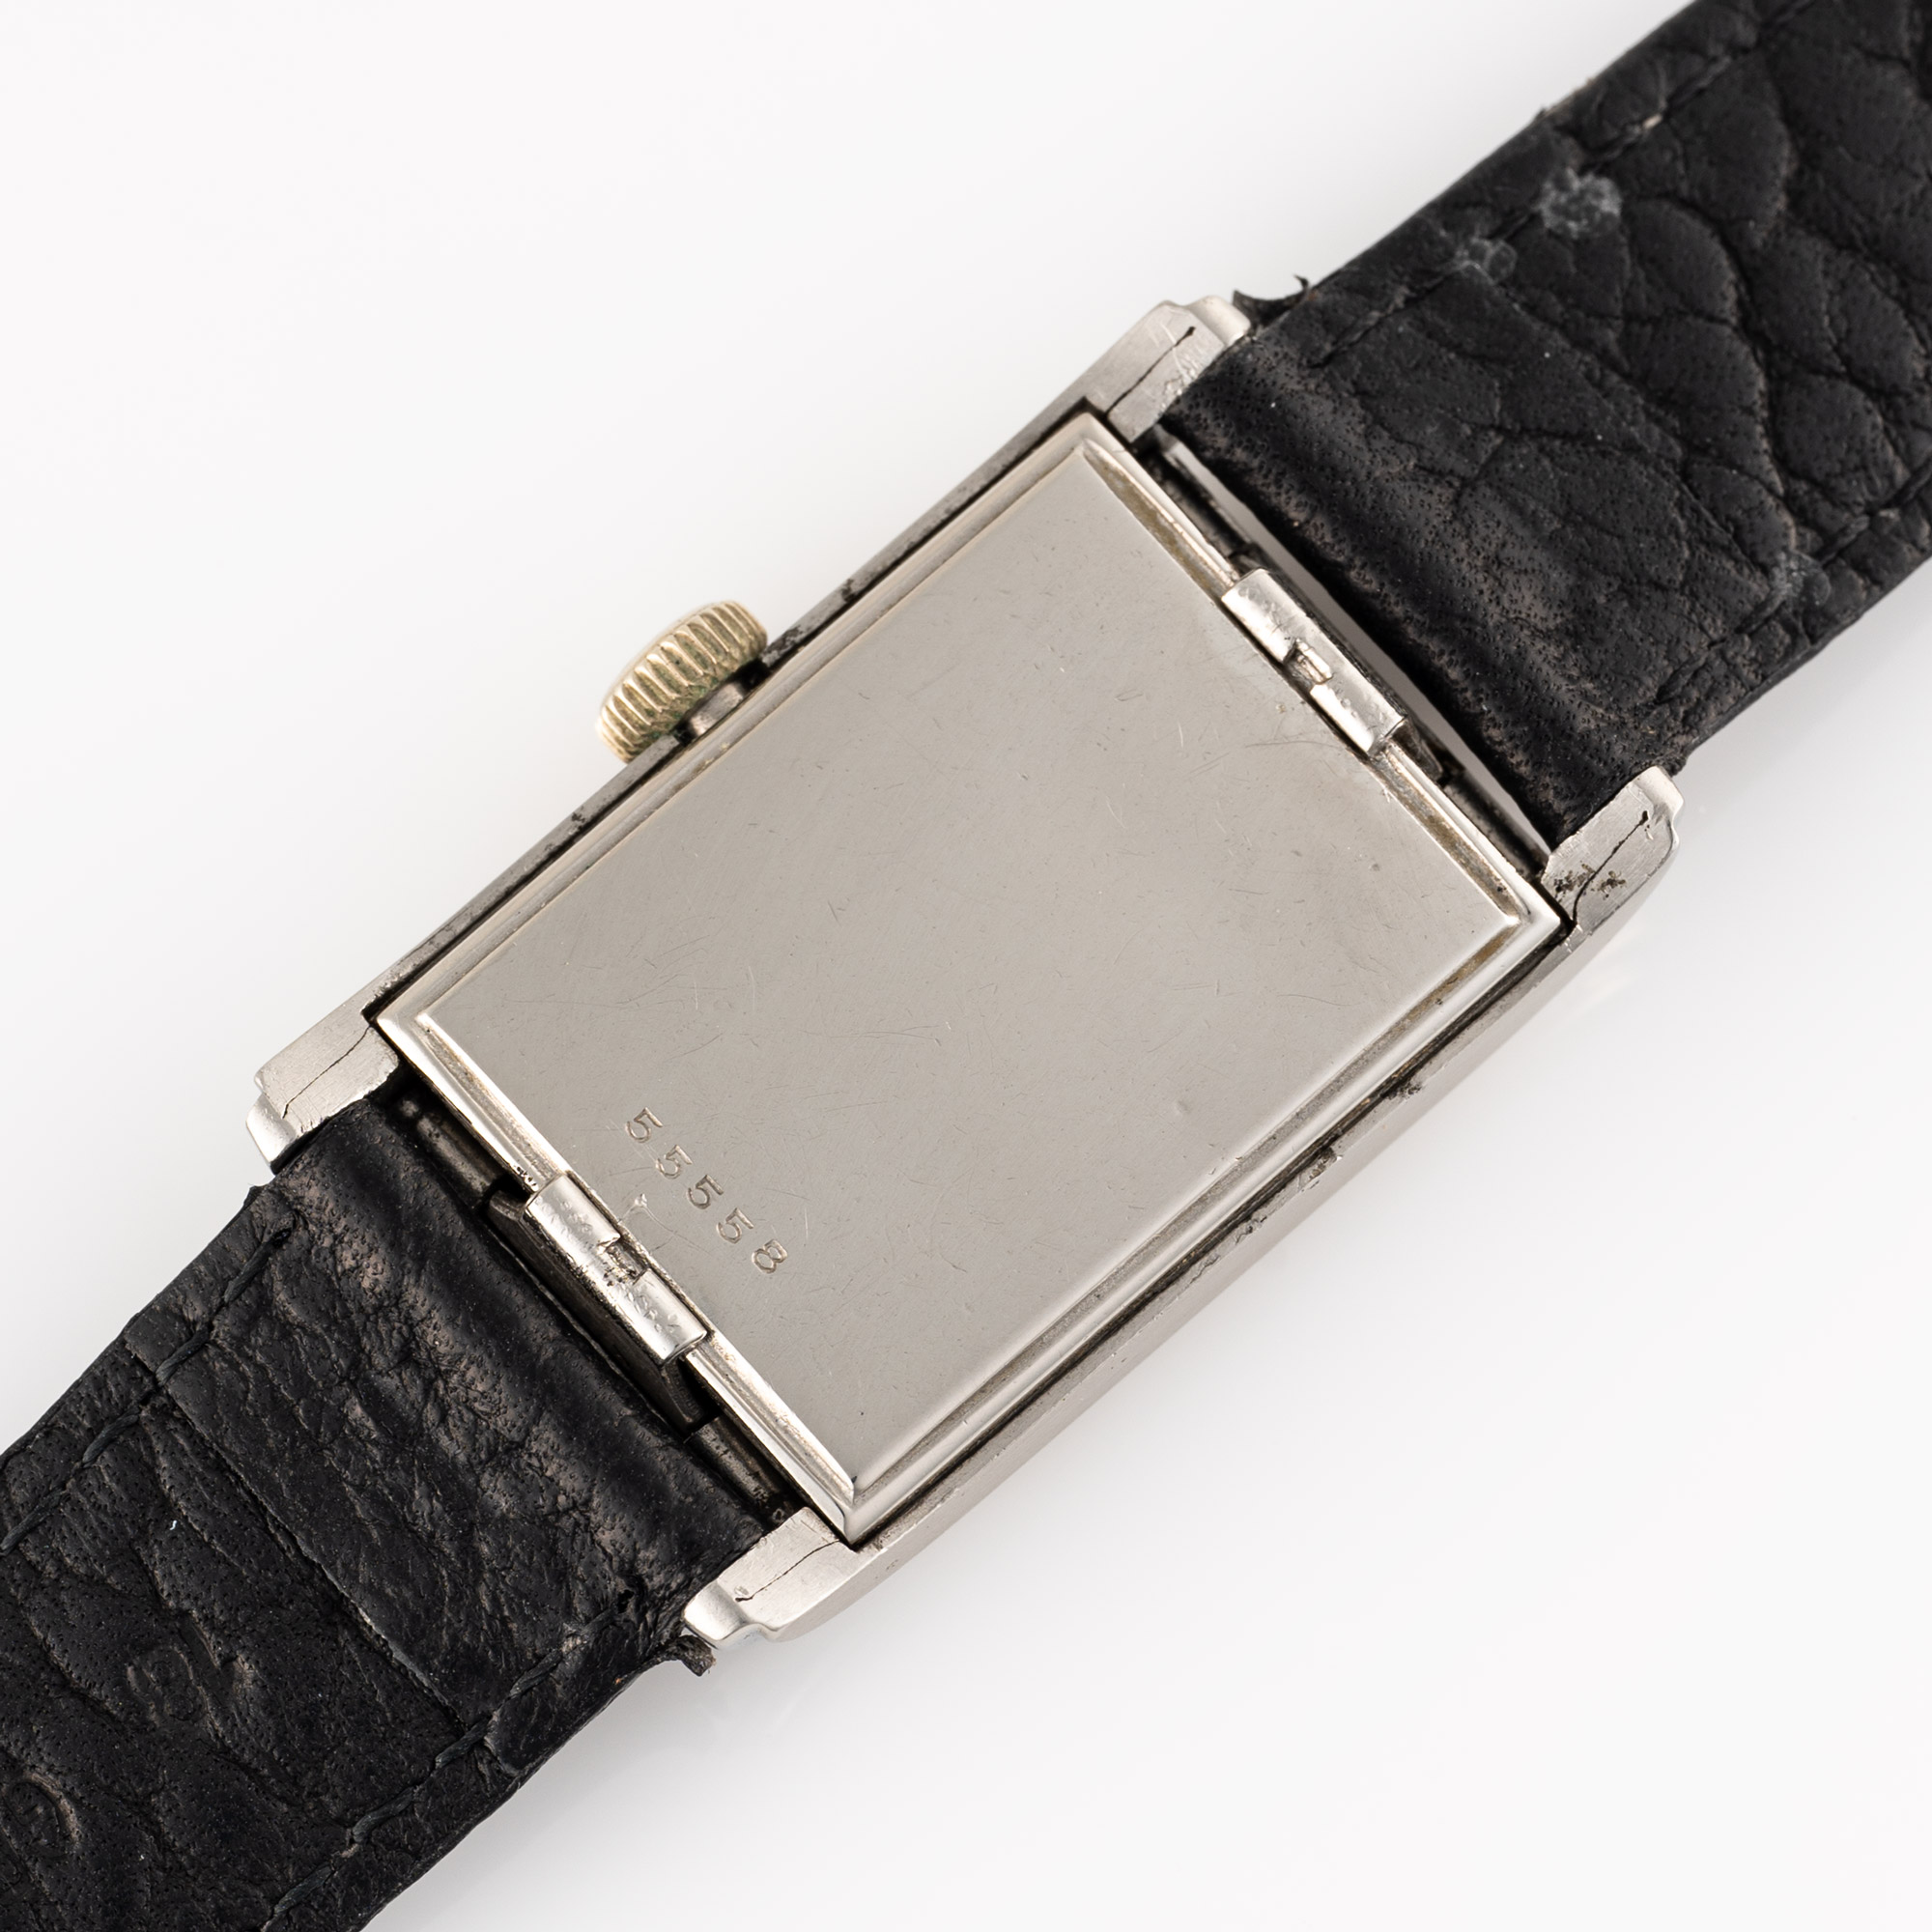 A GENTLEMAN'S SIZE STAINLESS STEEL JAEGER LECOULTRE ETANCHE WRIST WATCH CIRCA 1930s EARLY PATENTED - Image 7 of 7